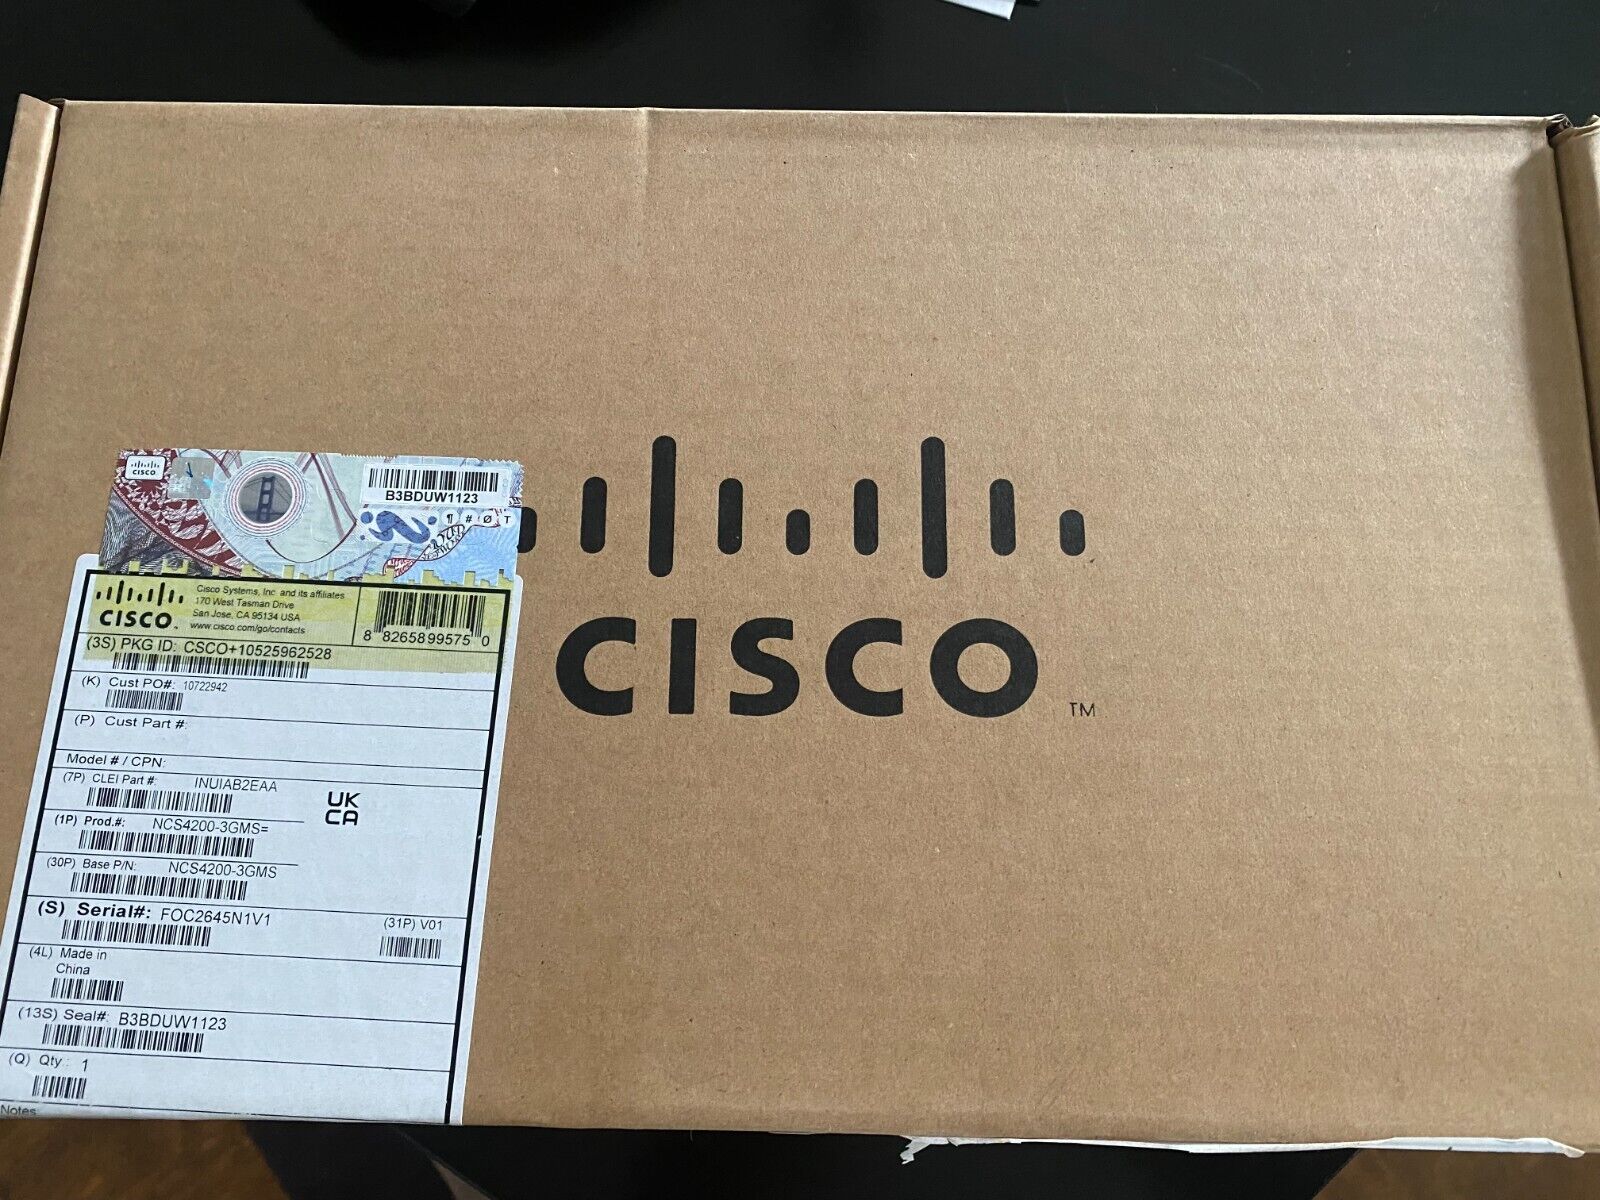 CISCO NCS4200-3GMS **BRAND NEW IN BOX SEALED**